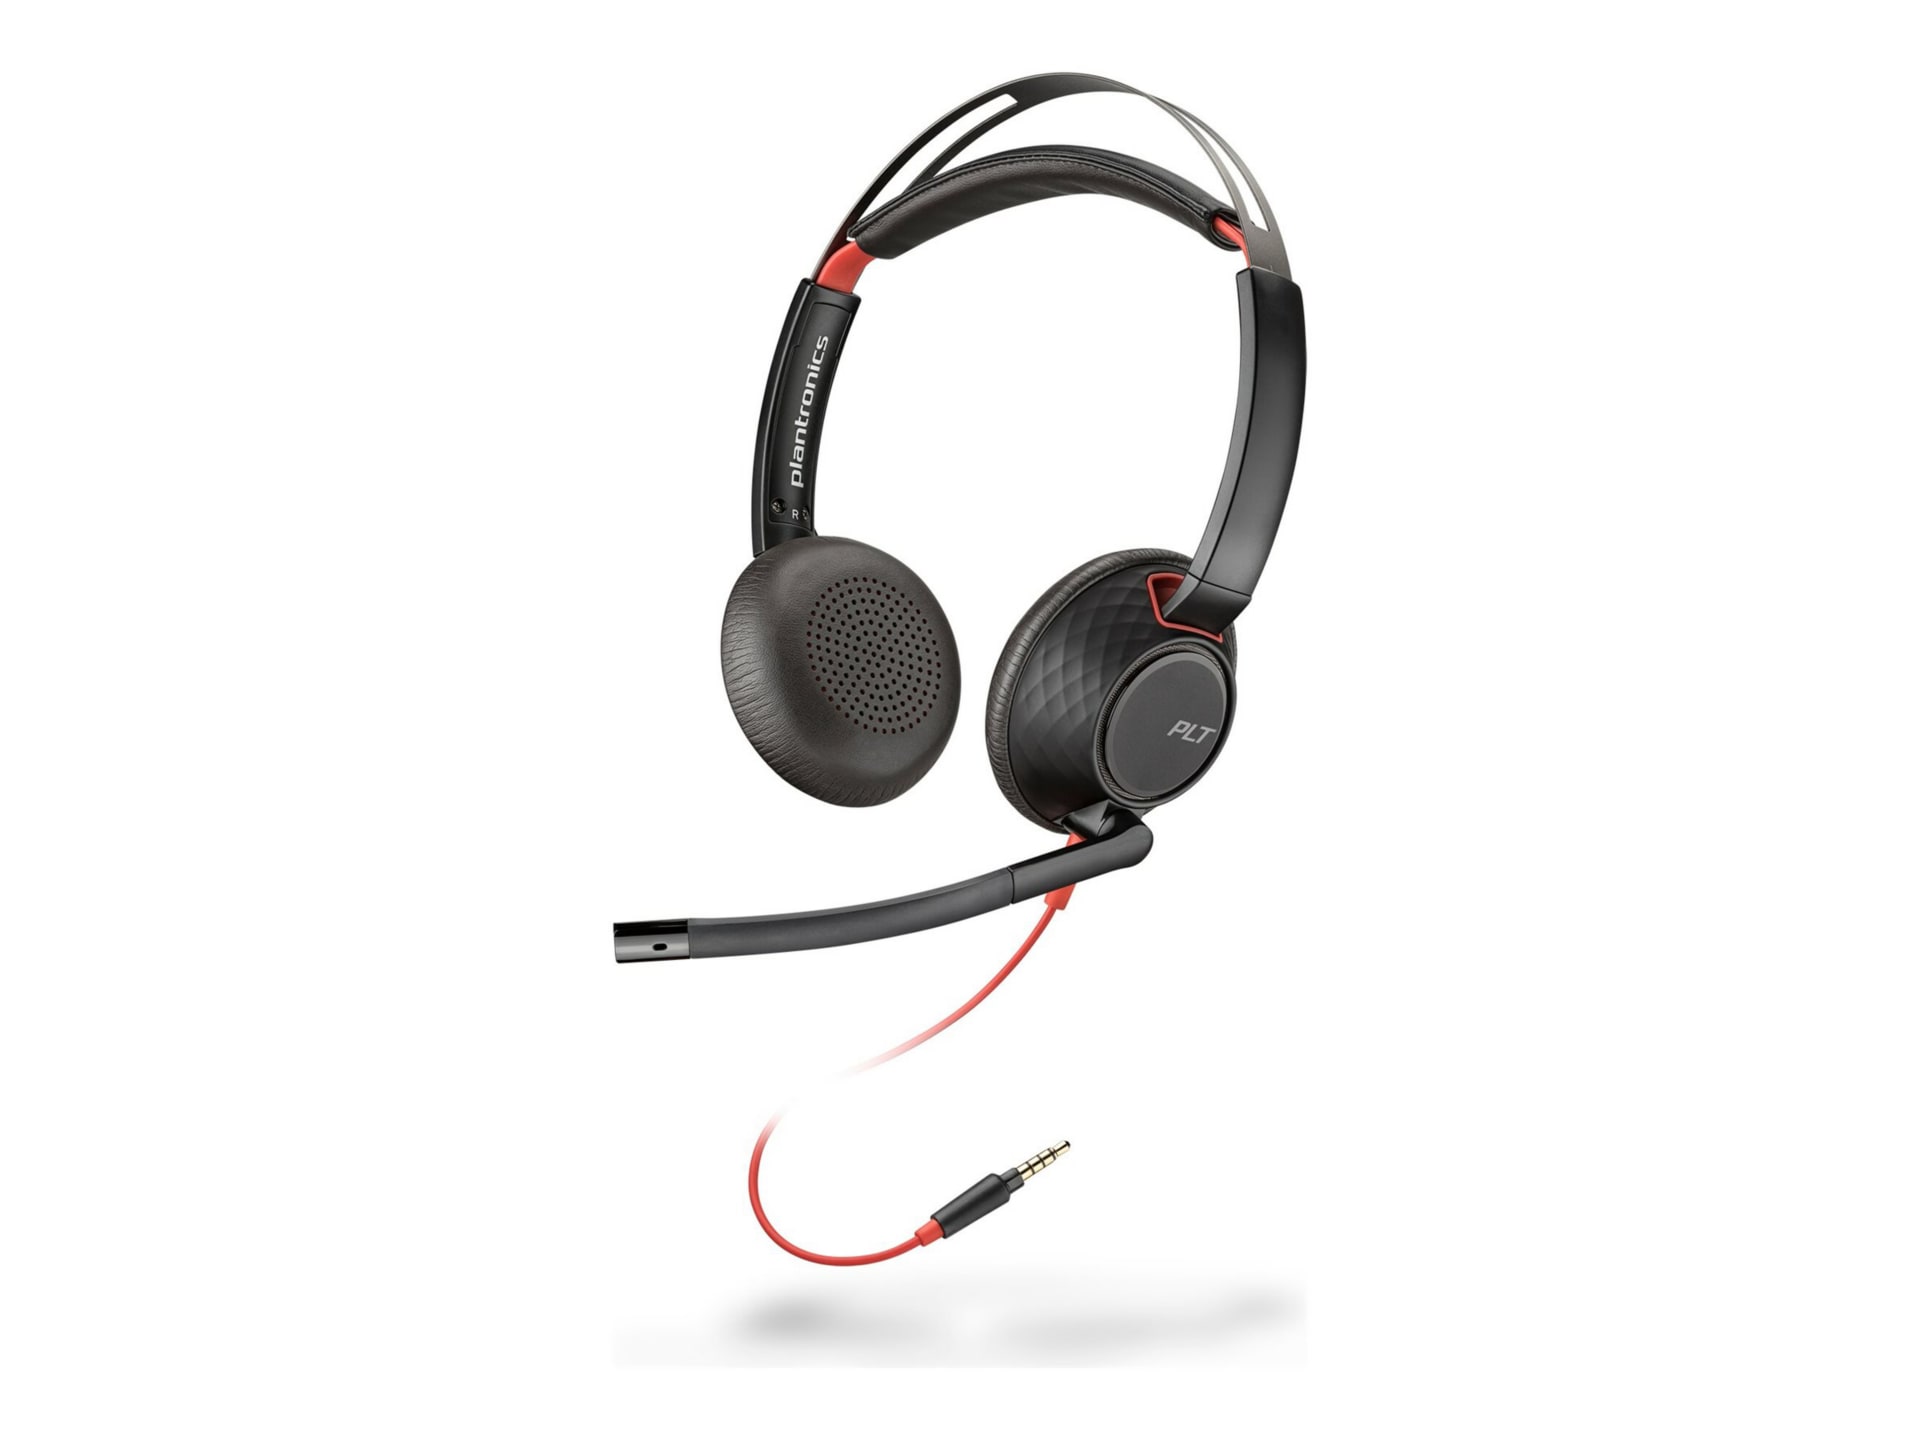 Poly Blackwire 5220 Headset